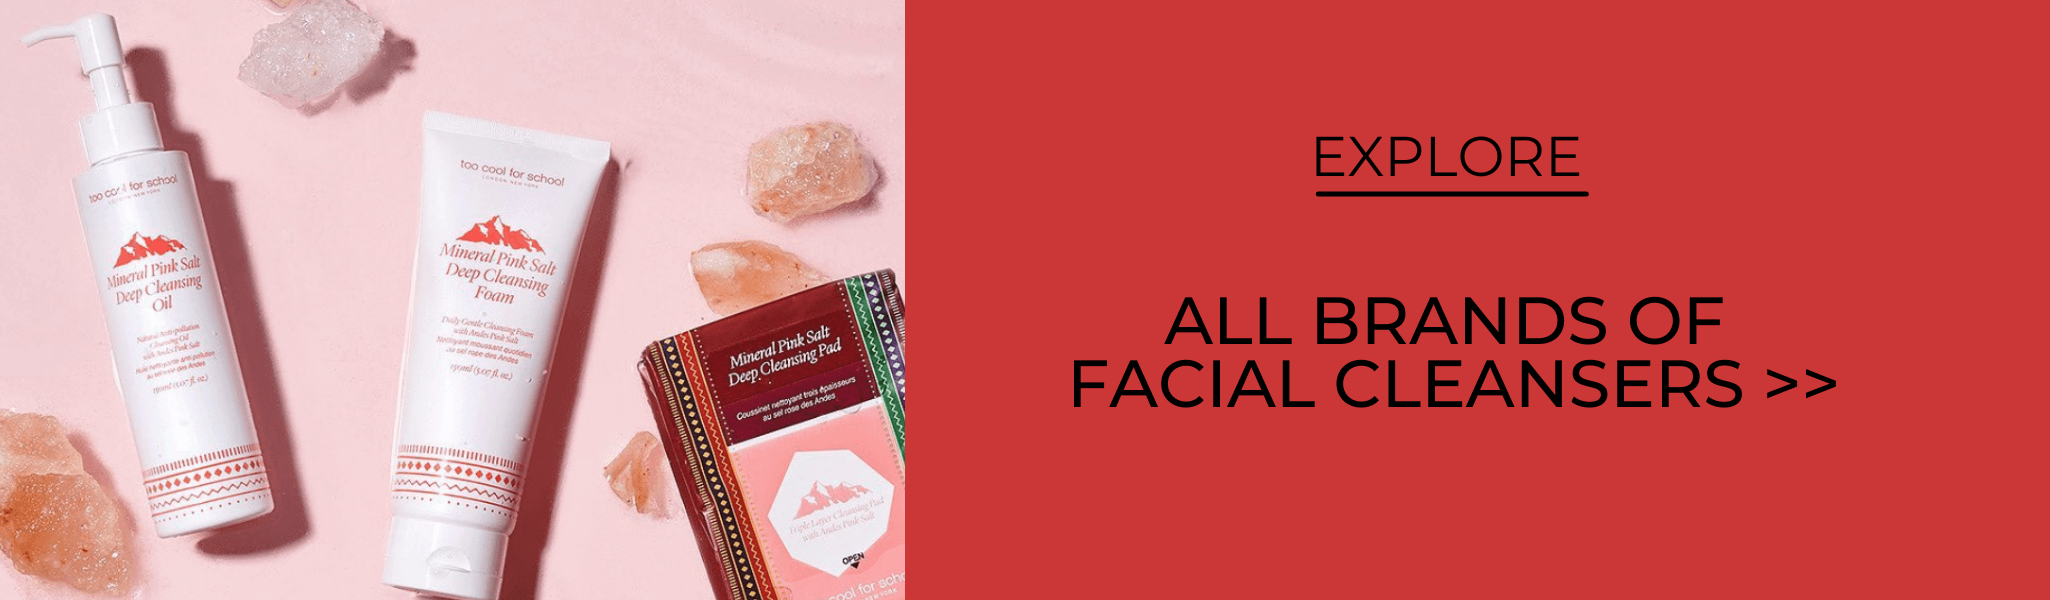 skin care facial cleansers